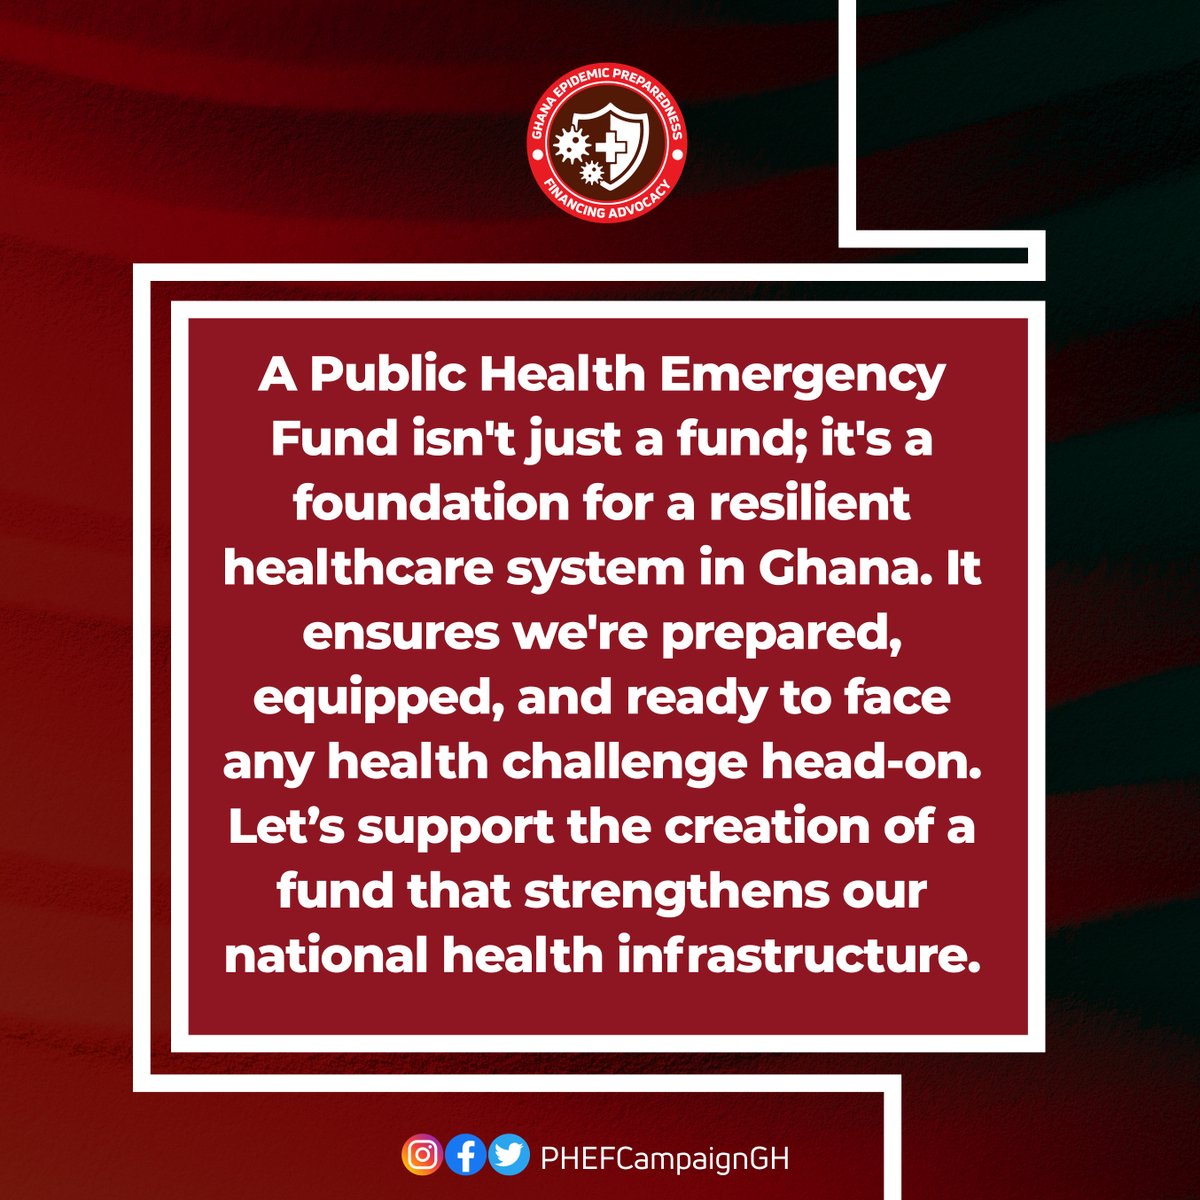 Building a Resilient Healthcare System: The Cornerstone of National Well-being. Let’s come together to urge the Government of Ghana to build this legacy. #FundEpidemicPreparednessGh #PHEFCampaignGH #Ghana